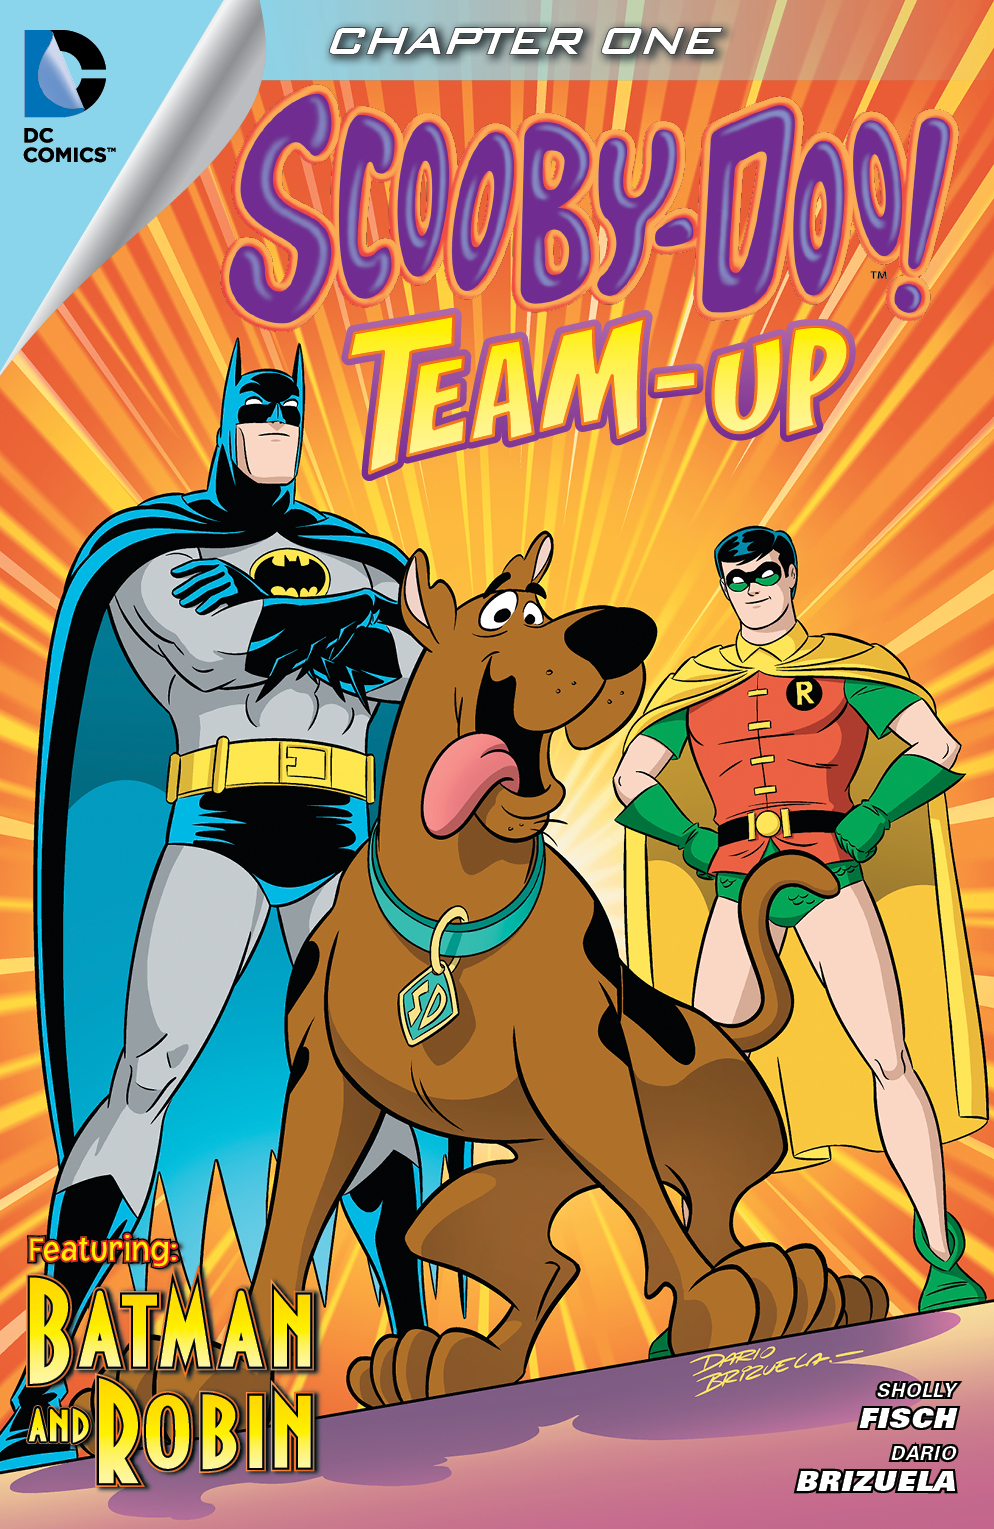 Scooby-Doo Team-Up #1 preview images